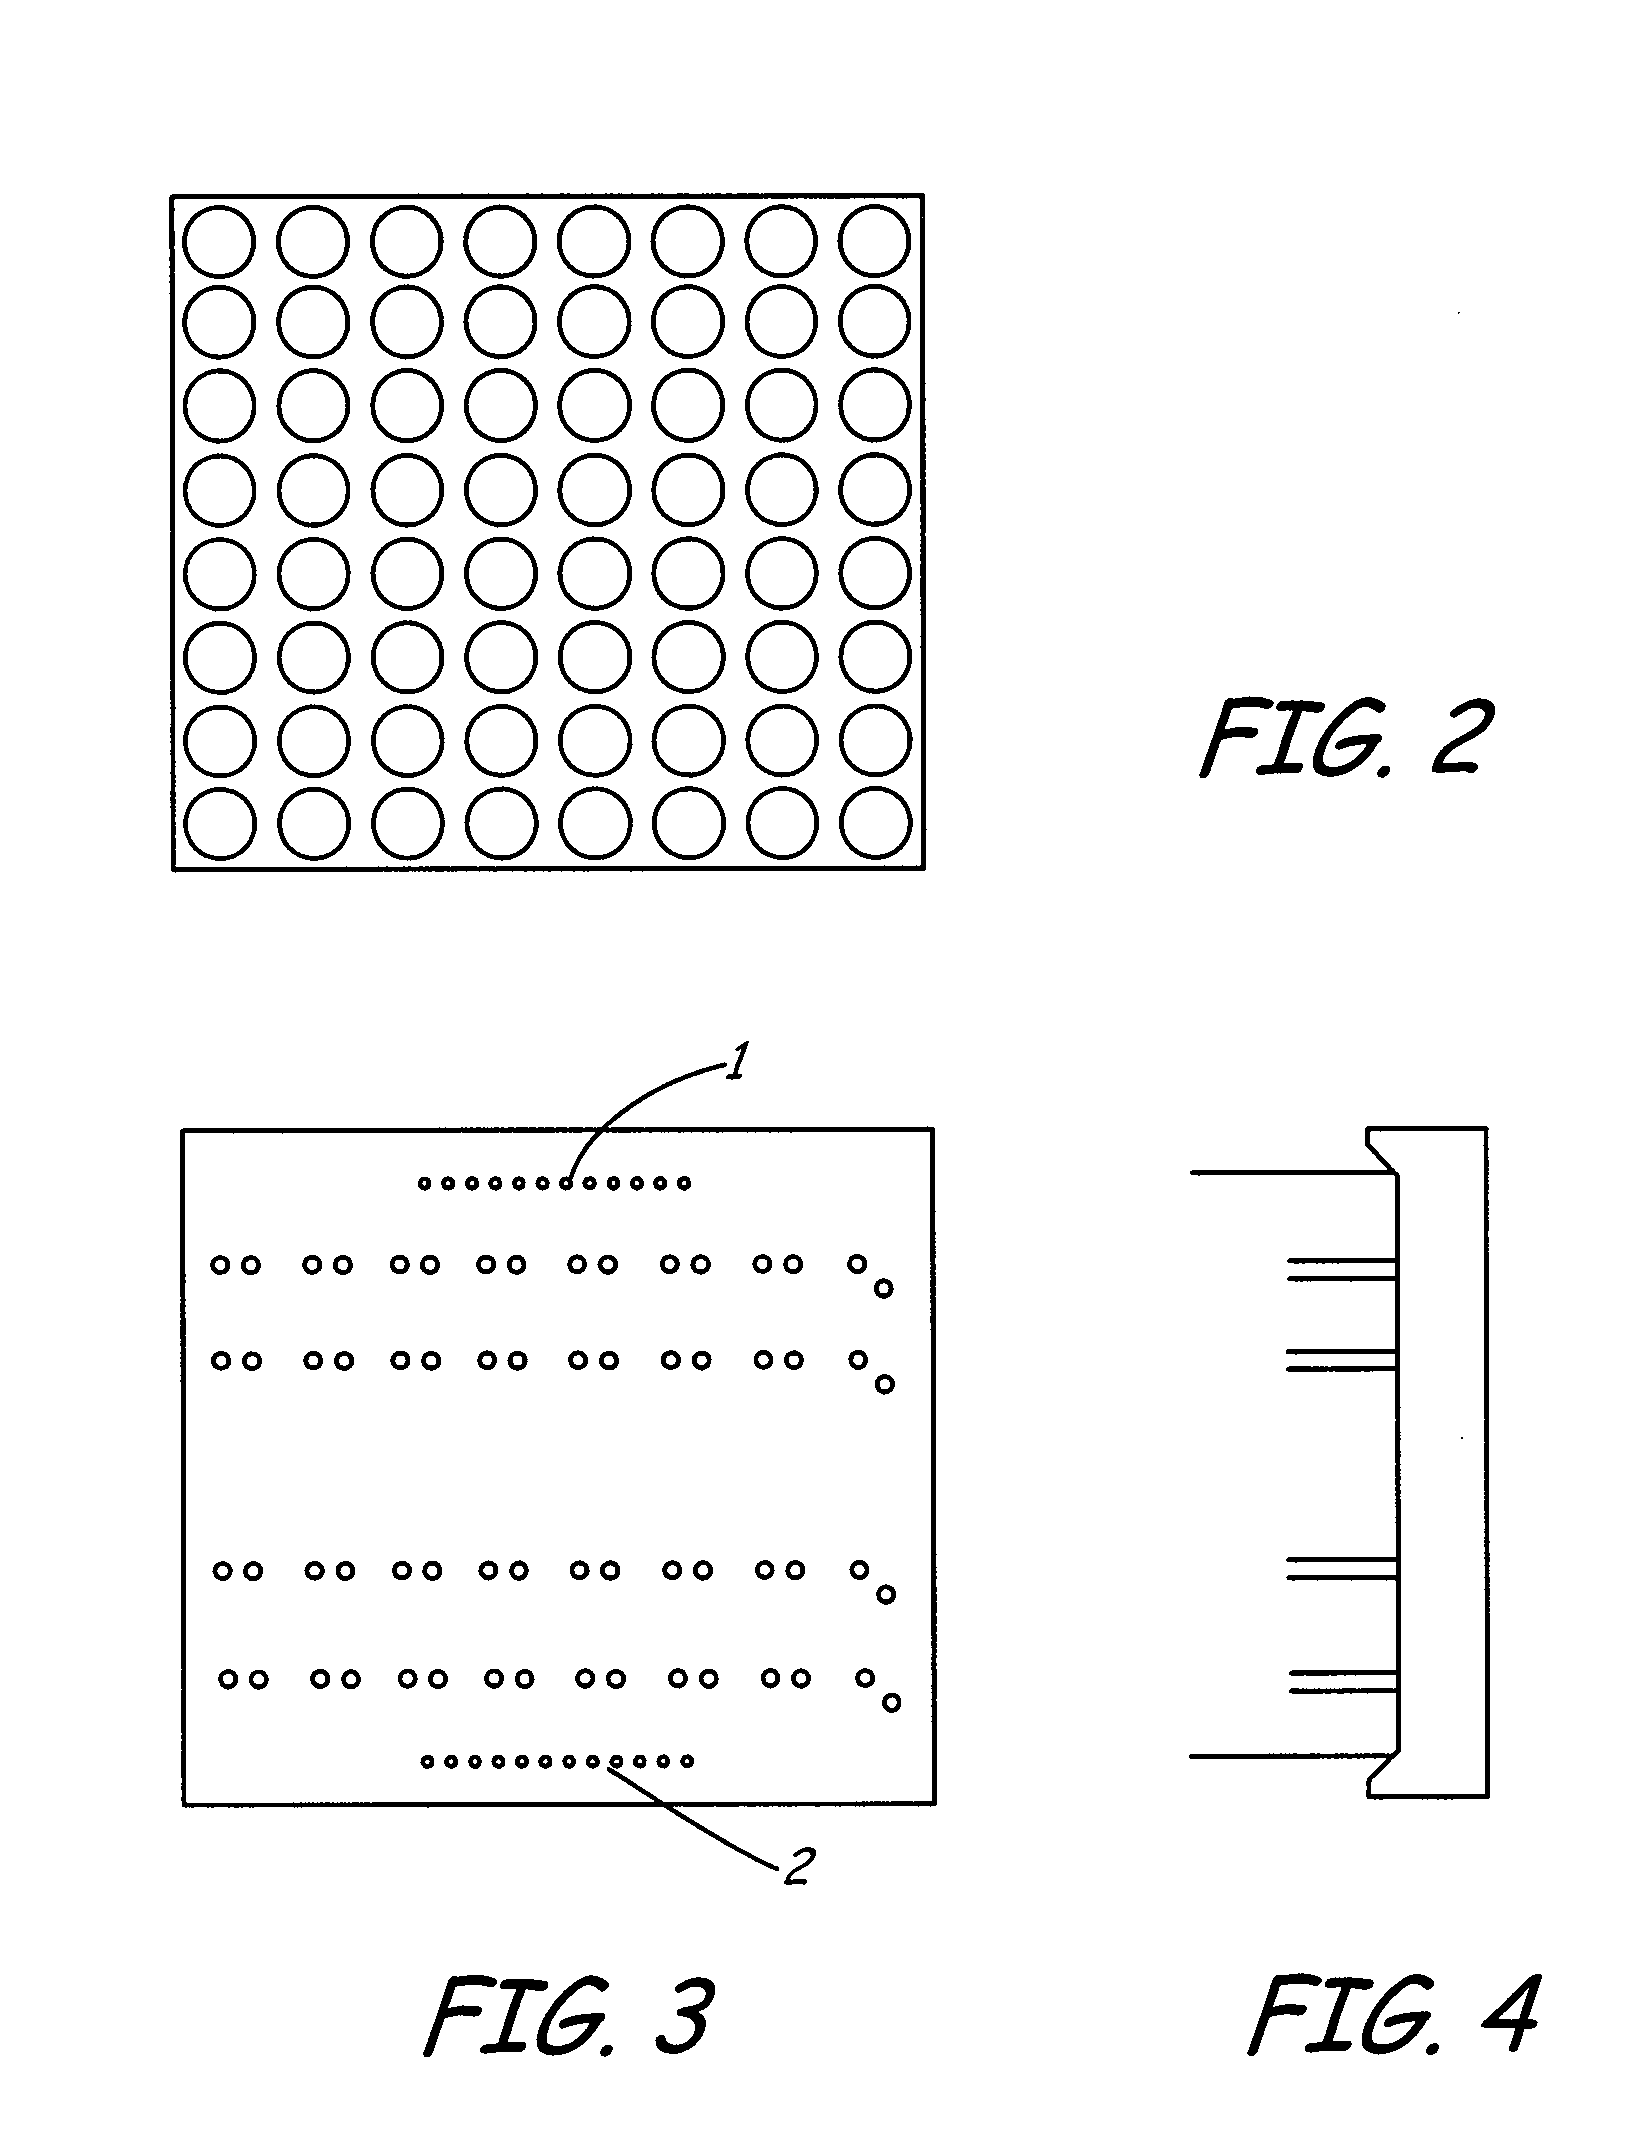 Heat dissipating pin structure for mitigation of LED temperature rise